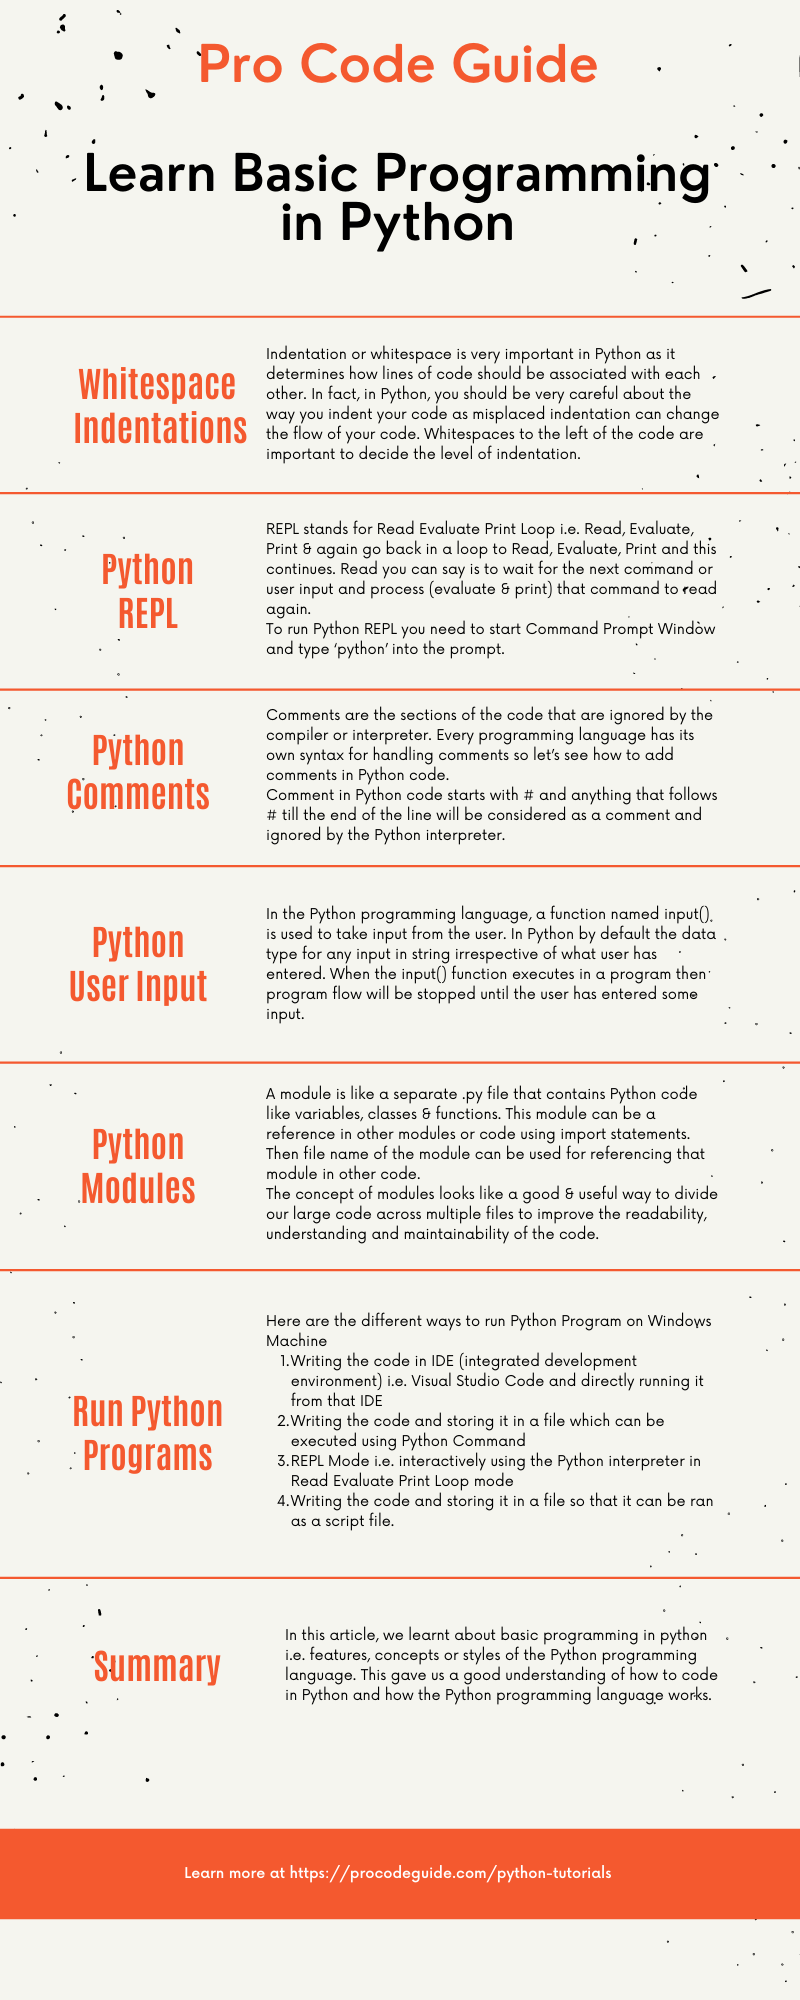 Learn Basic Programming in Python - Infographic